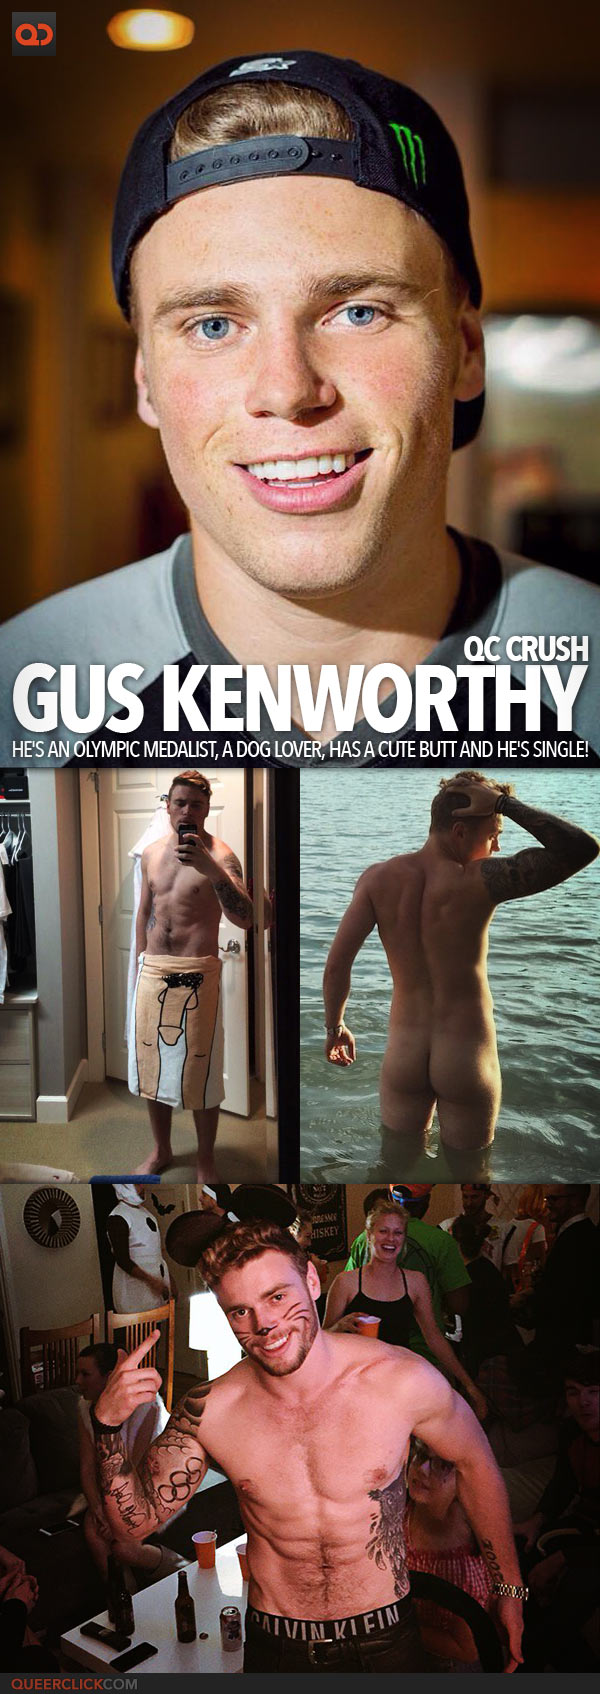 QC Crush: Gus Kenworthy, He's An Olympic Medalist, A Dog Lover, Has A Cute Butt And He's Single!